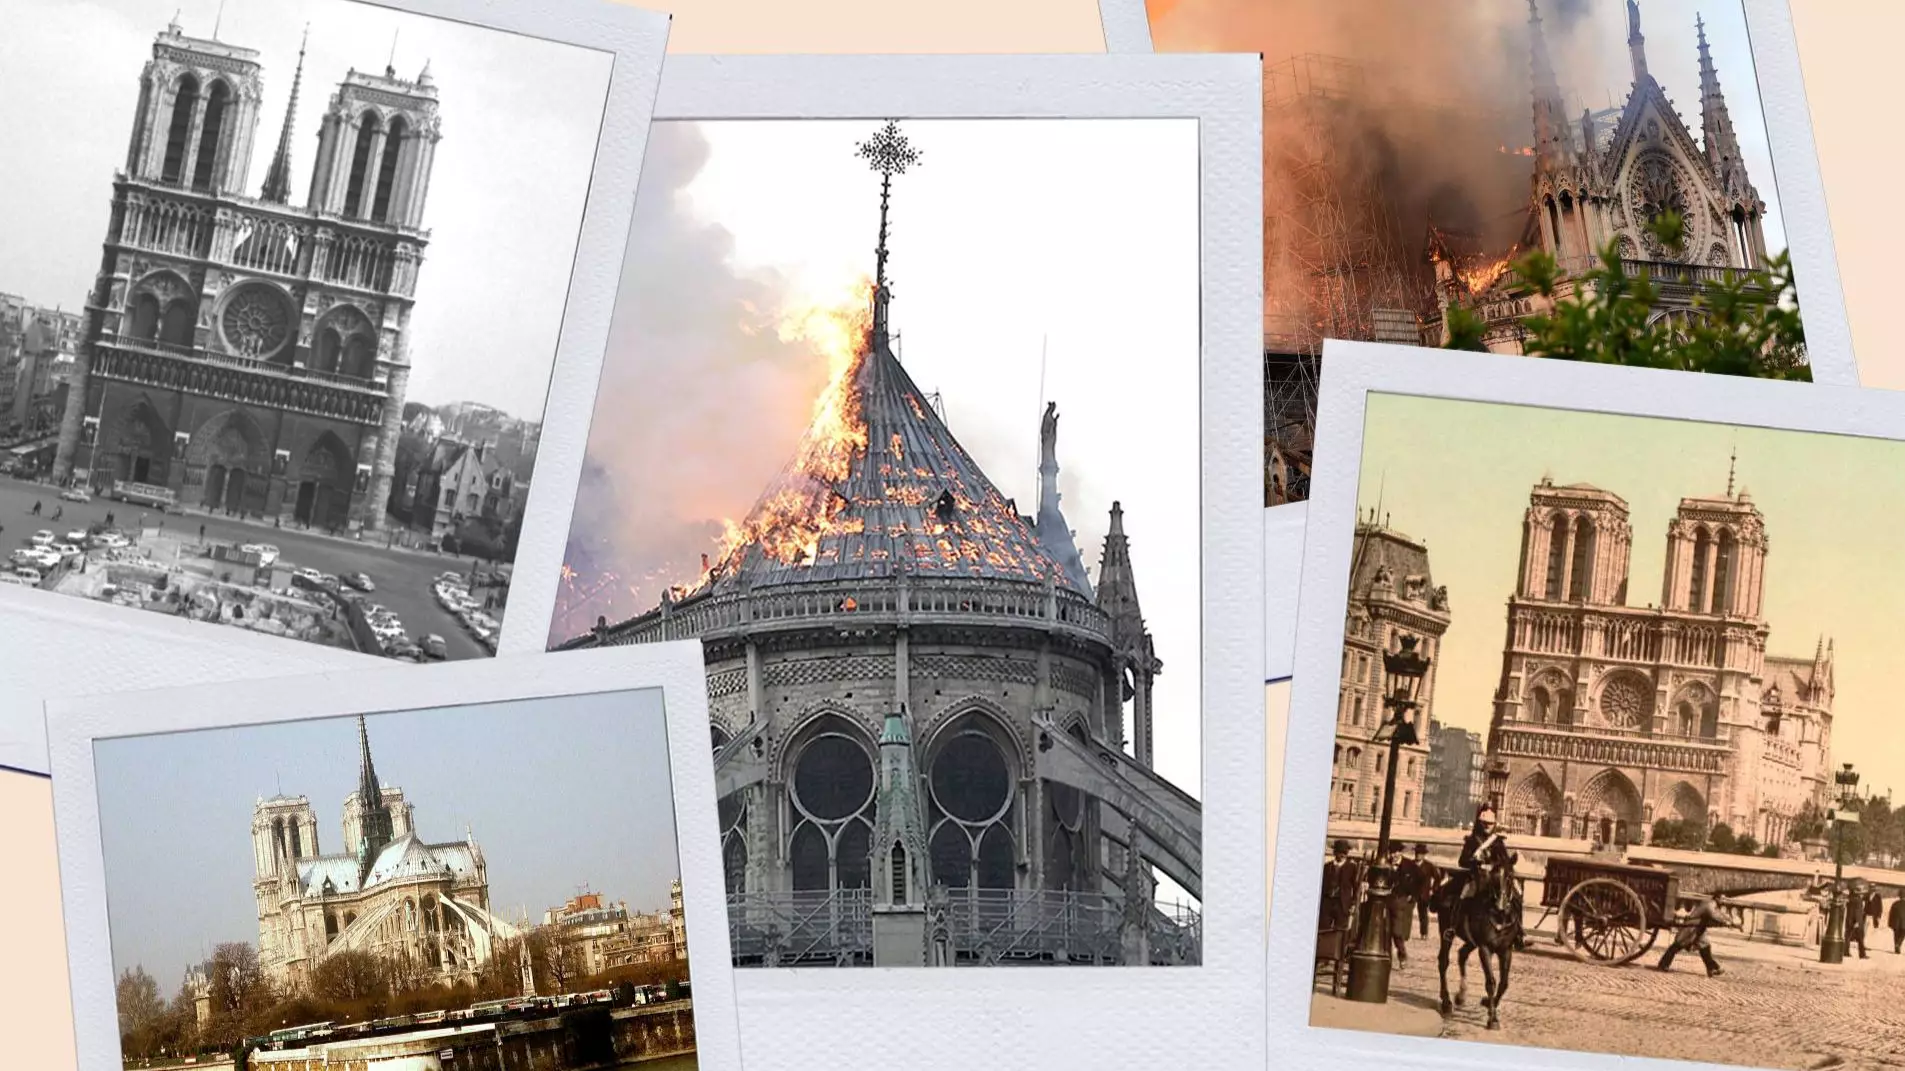 ​Pictures Taken Over 100 Years Apart Show The Rich History Of Notre-Dame 